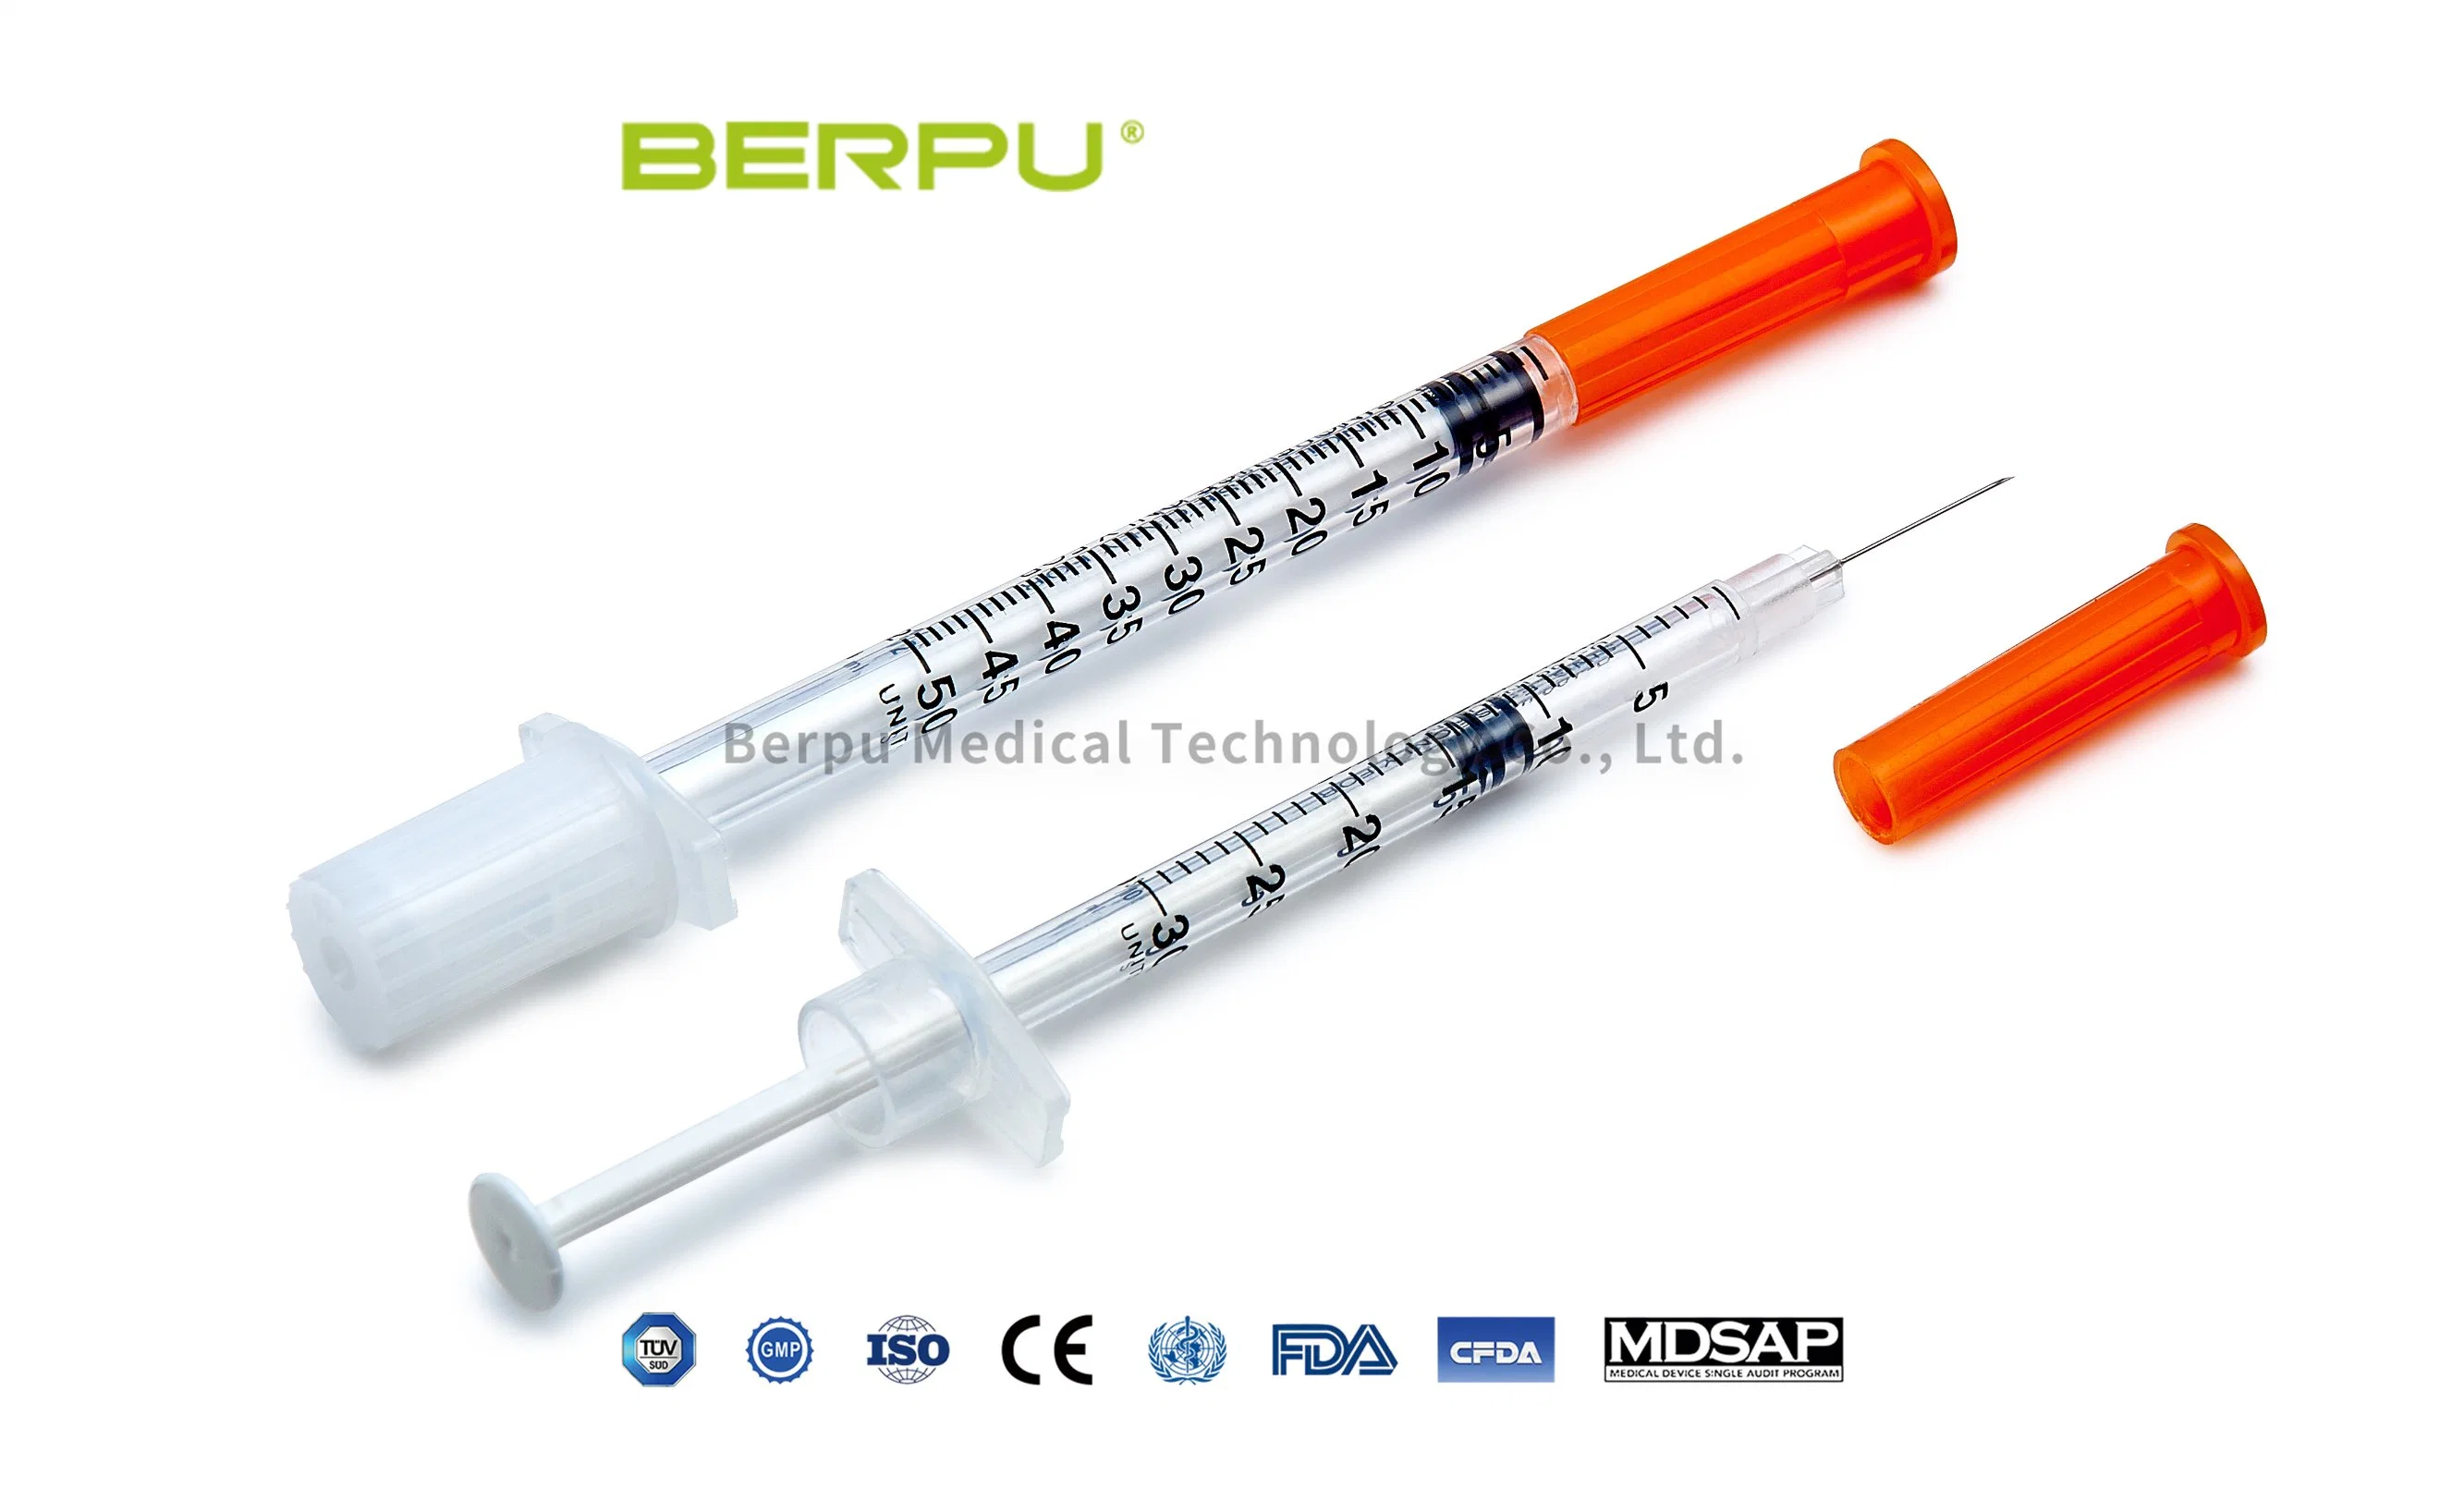 Eo Sterile Disposable Medical Blister or 10PCS Polybag Package Diabetes 1ml 0.5ml 0.3ml Insulin Syringe with Fixed Needle 29g 30g 31g*6mm